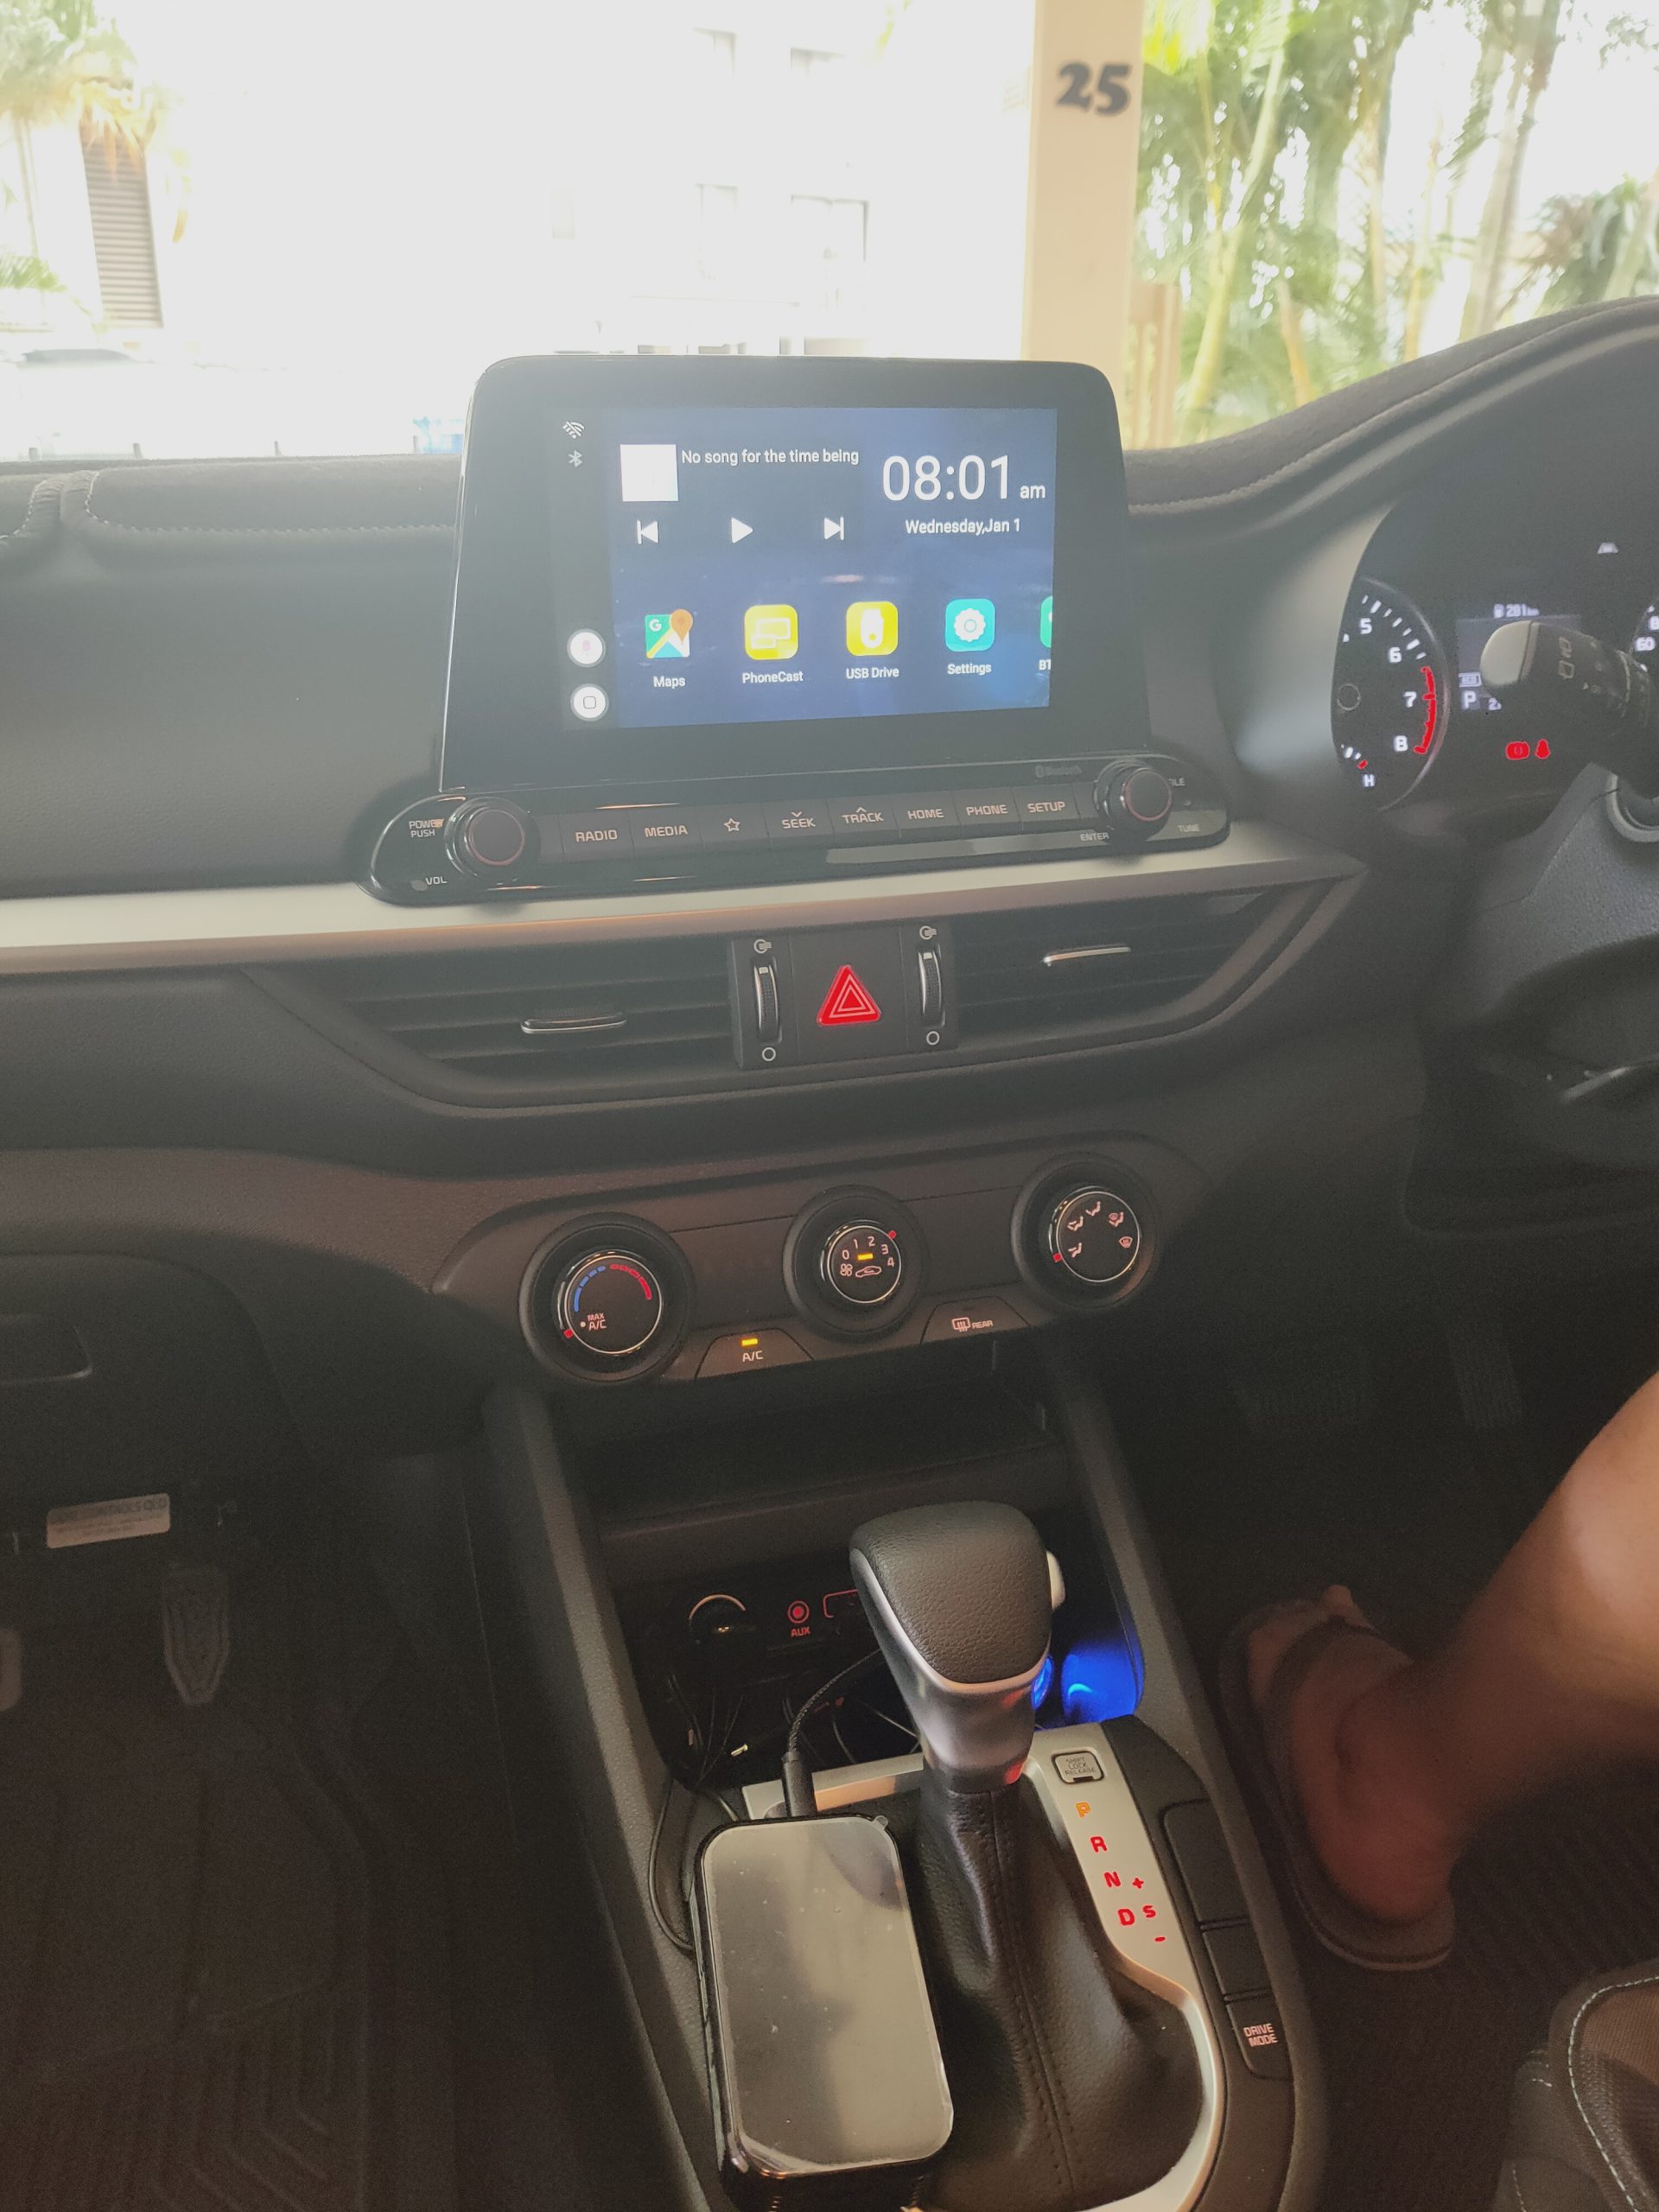 Picture of a Kia radio with a new Android Interface for factory Carplay vehicles. WHatch Youtube and Netflix on your radio screen!